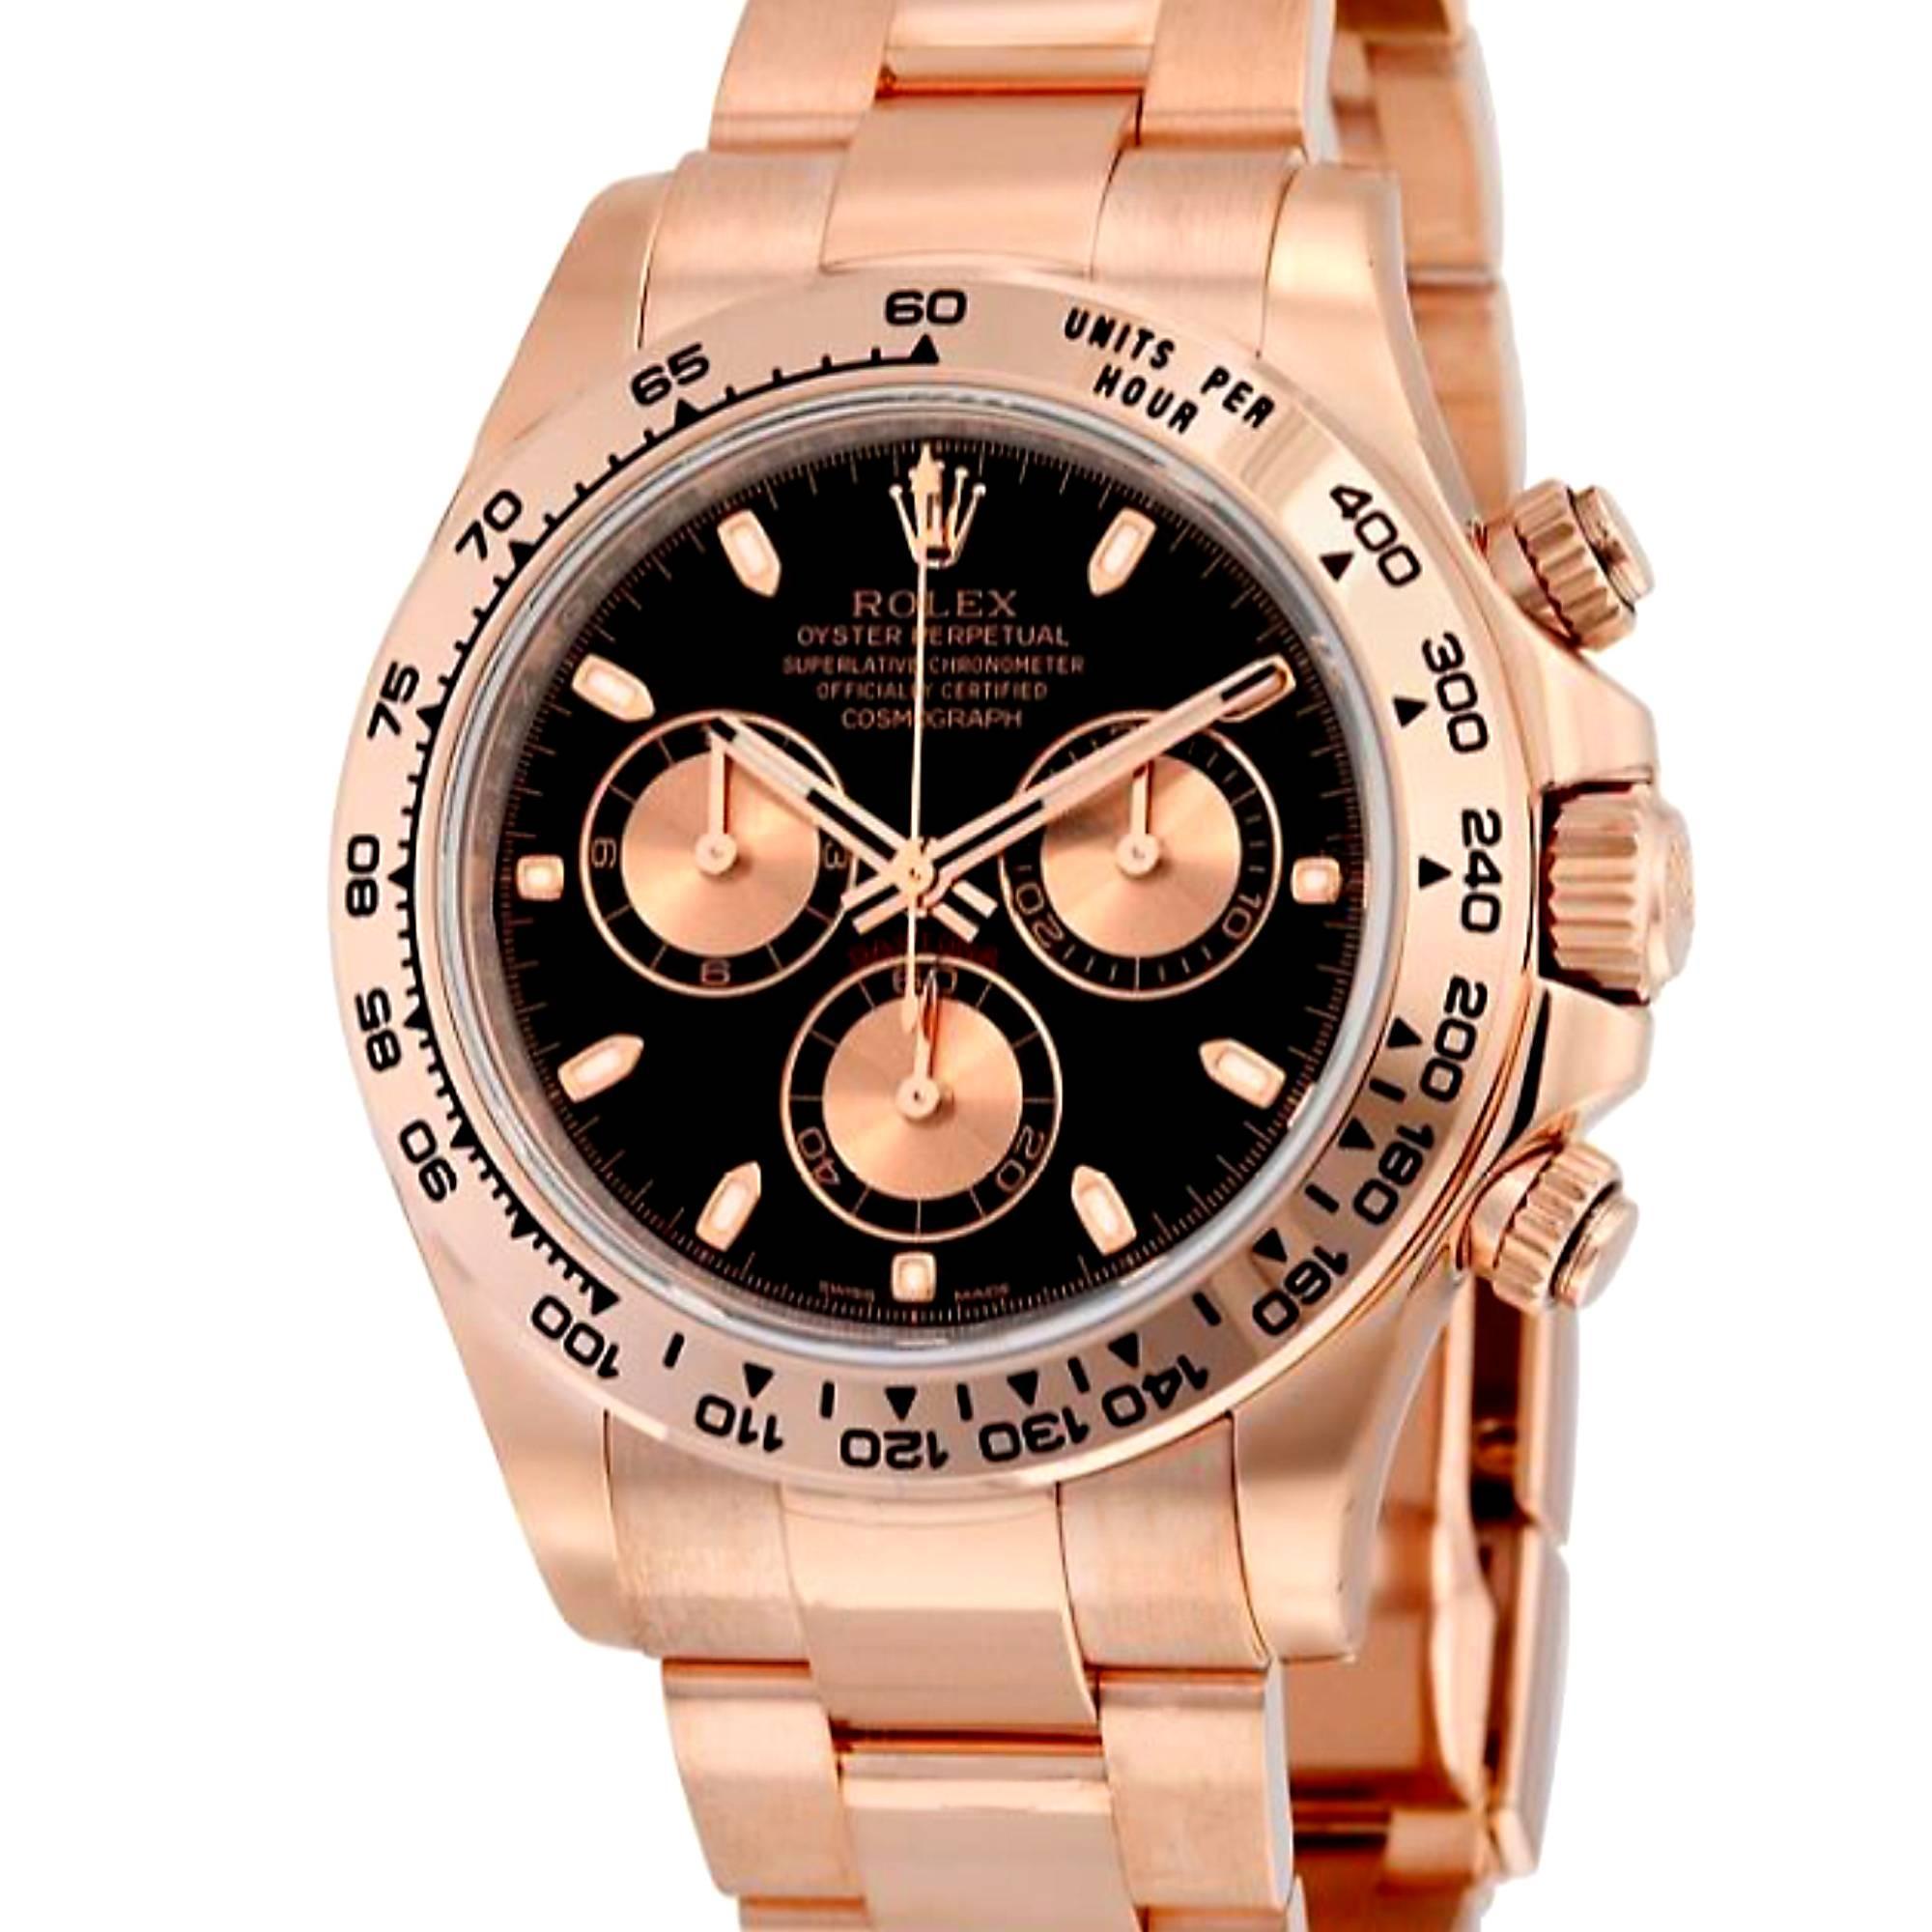 A must have sporty Rolex Daytona rose gold cosmograph, this watch exudes good taste.  This substantial watch has a case diameter of 40 mm and can operate at depths up to 100 meters (330 Feet). The interior of this watch is astounding, boasting a